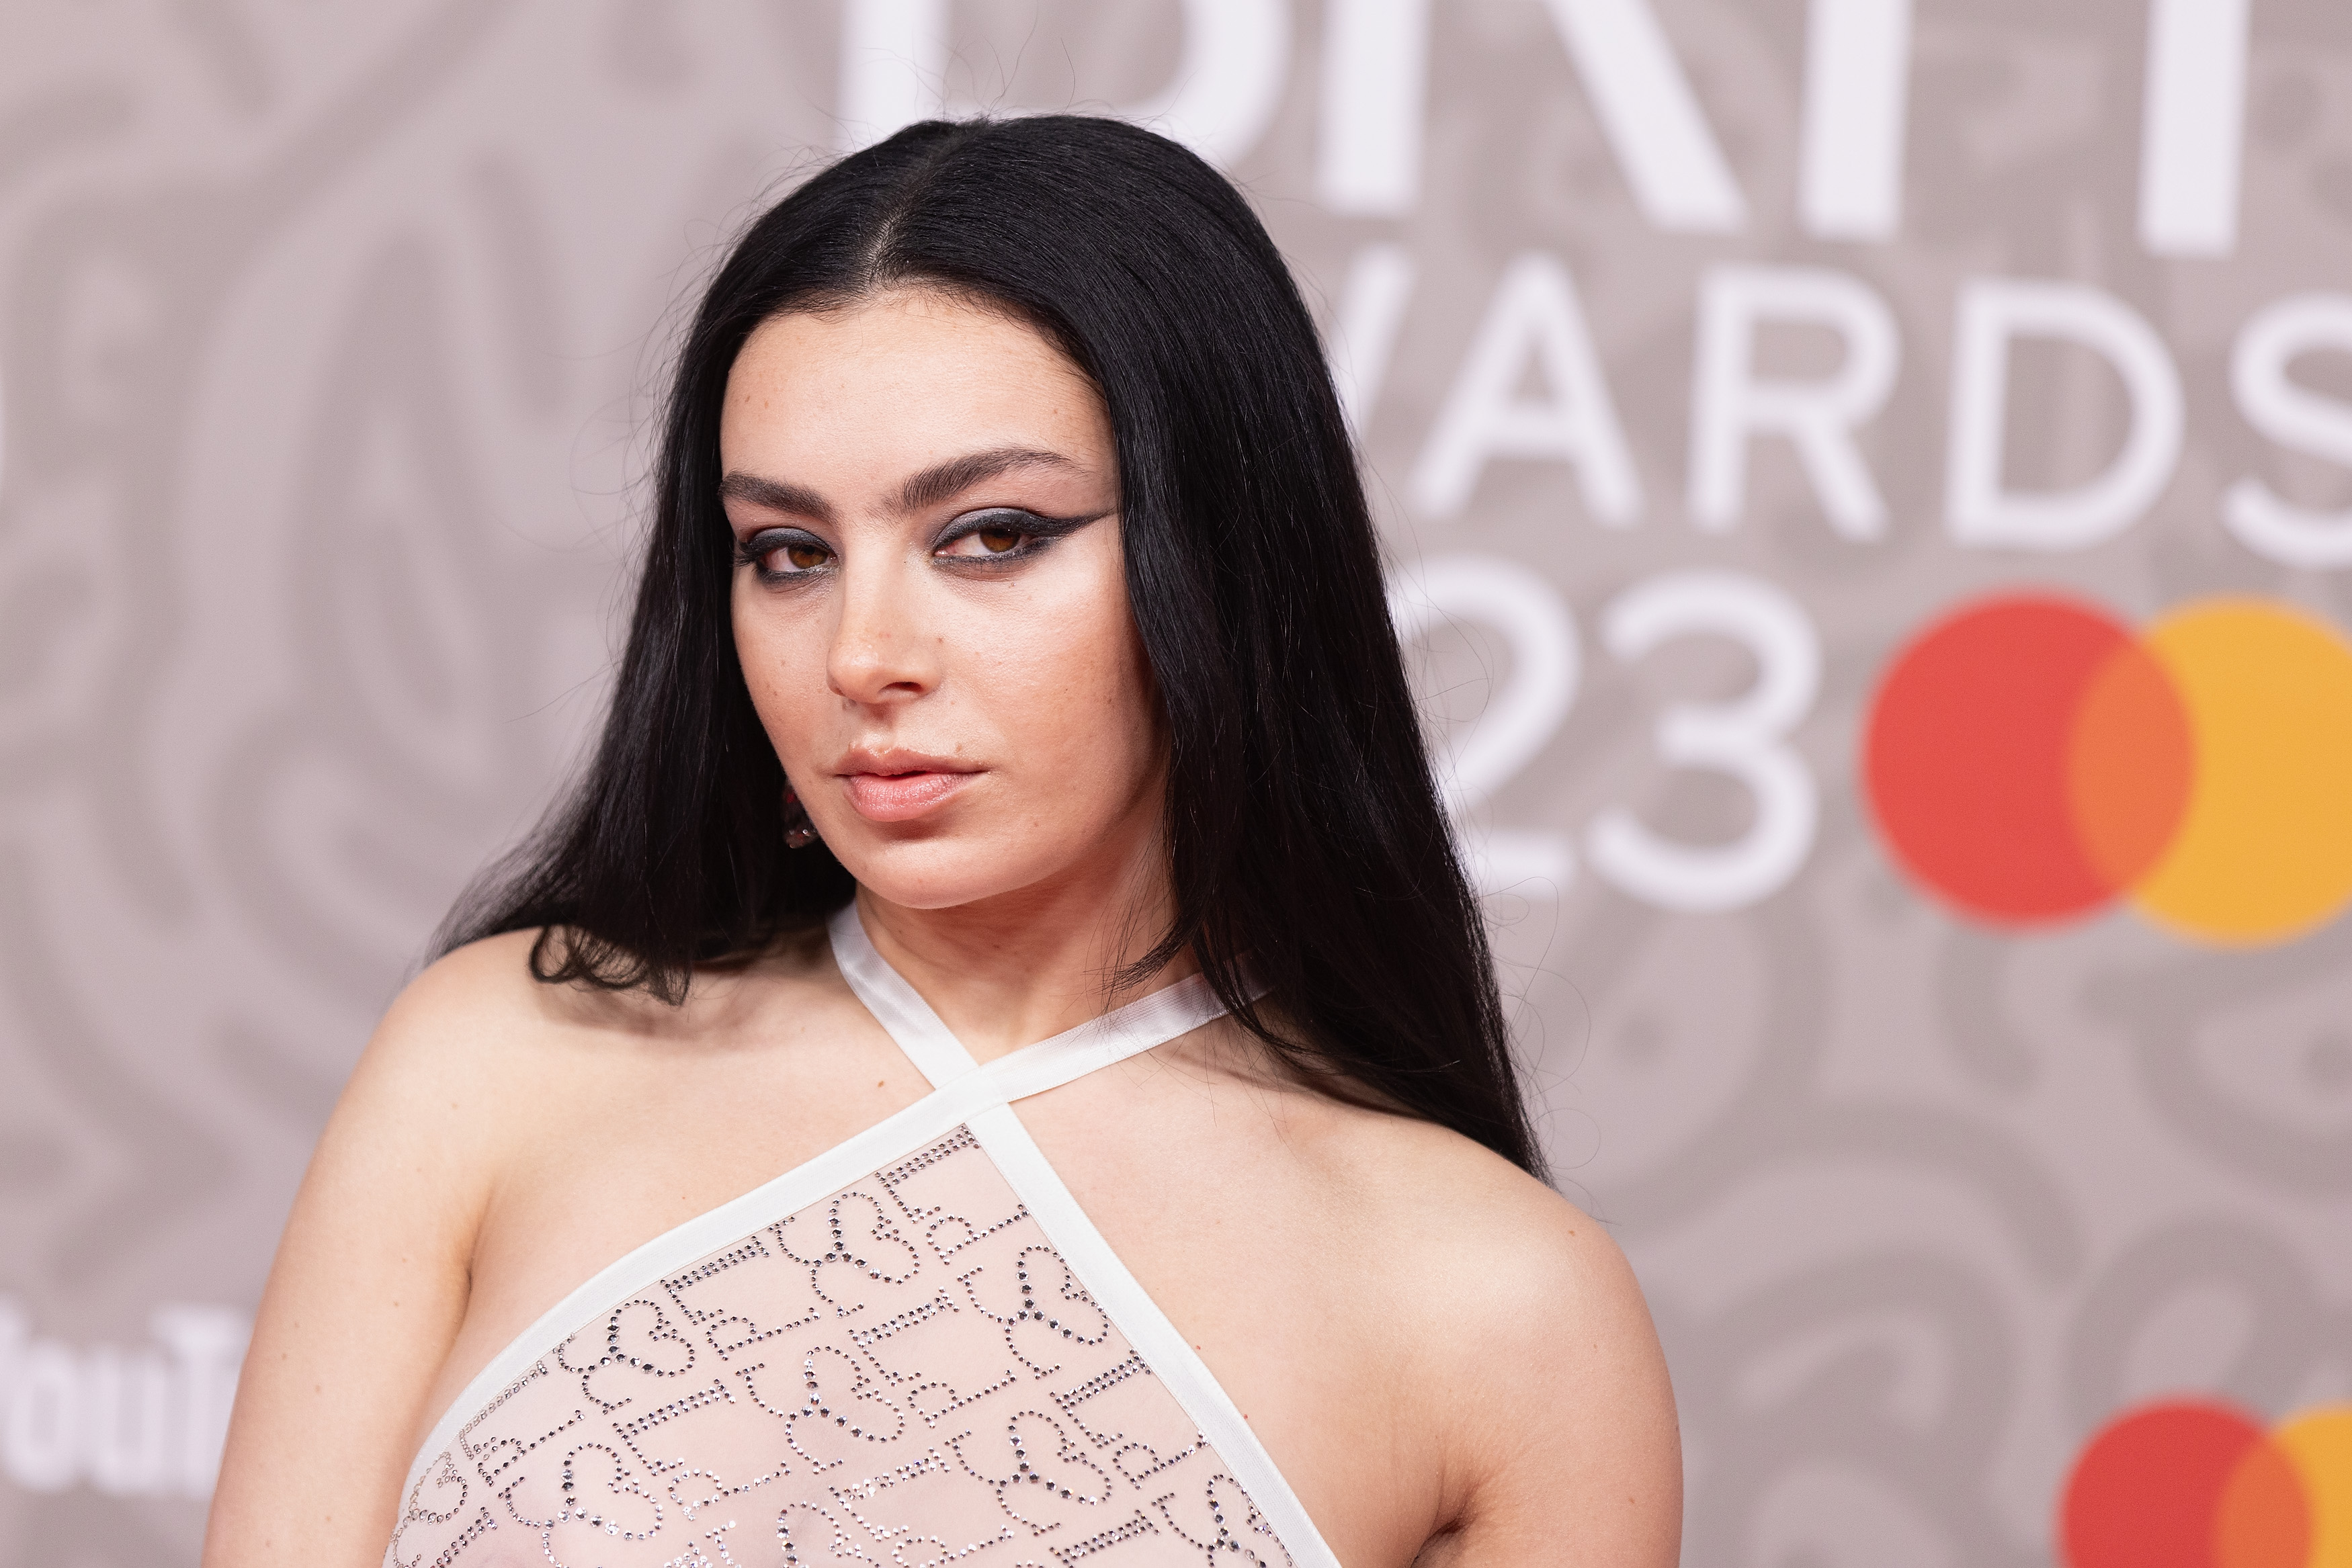 Charli XCX at The Brit Awards 2023 on February 11, 2023, in London, England. | Source: Getty Images